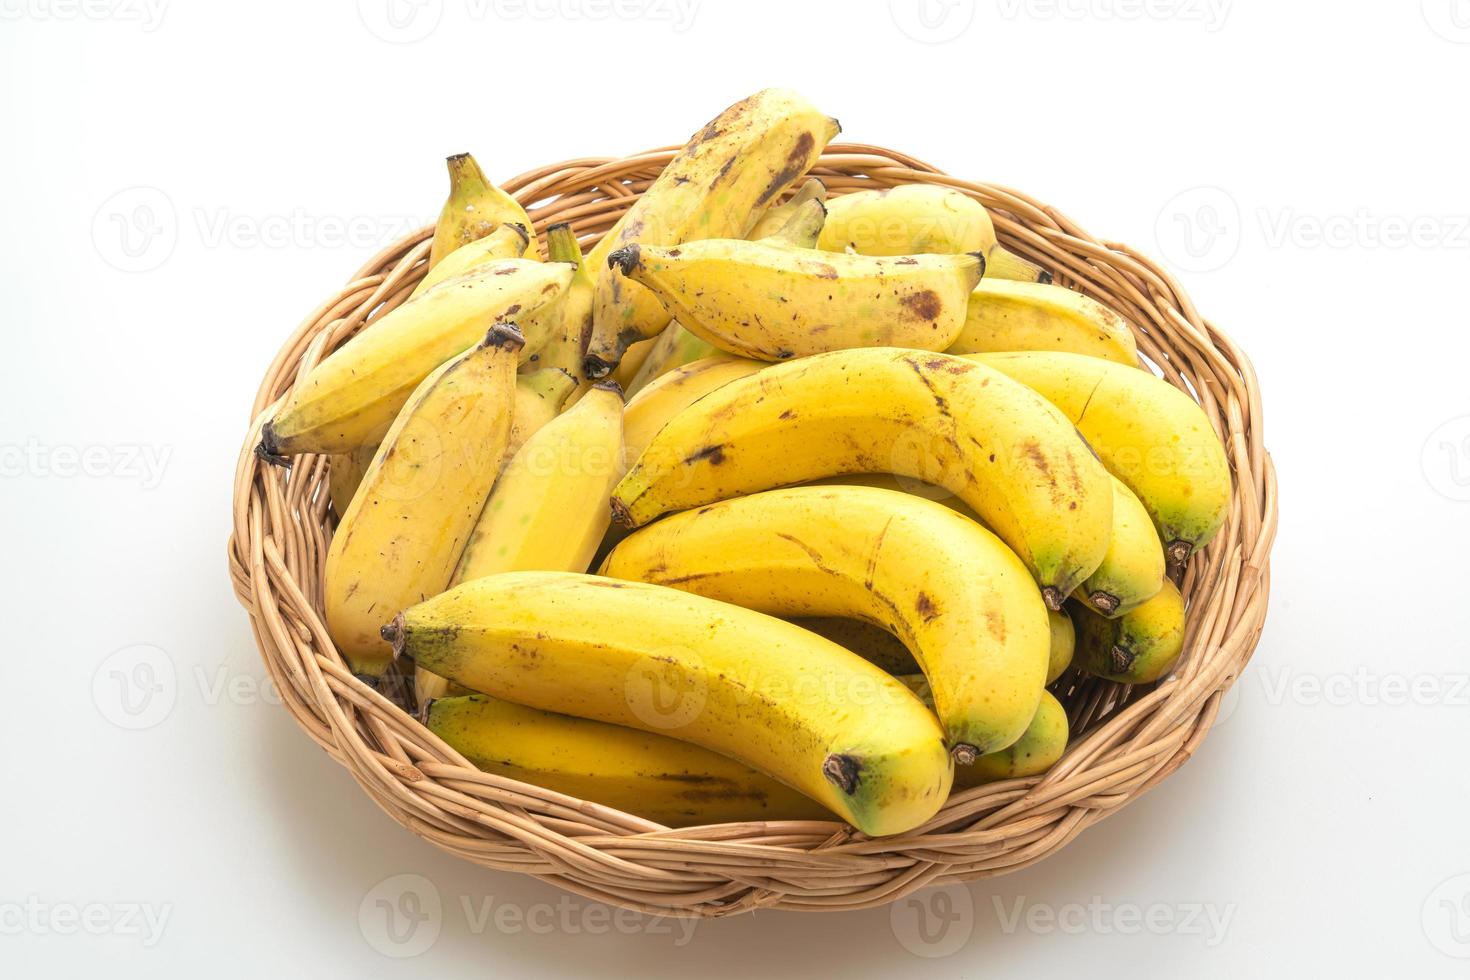 Fresh yellow bananas in basket on the table photo